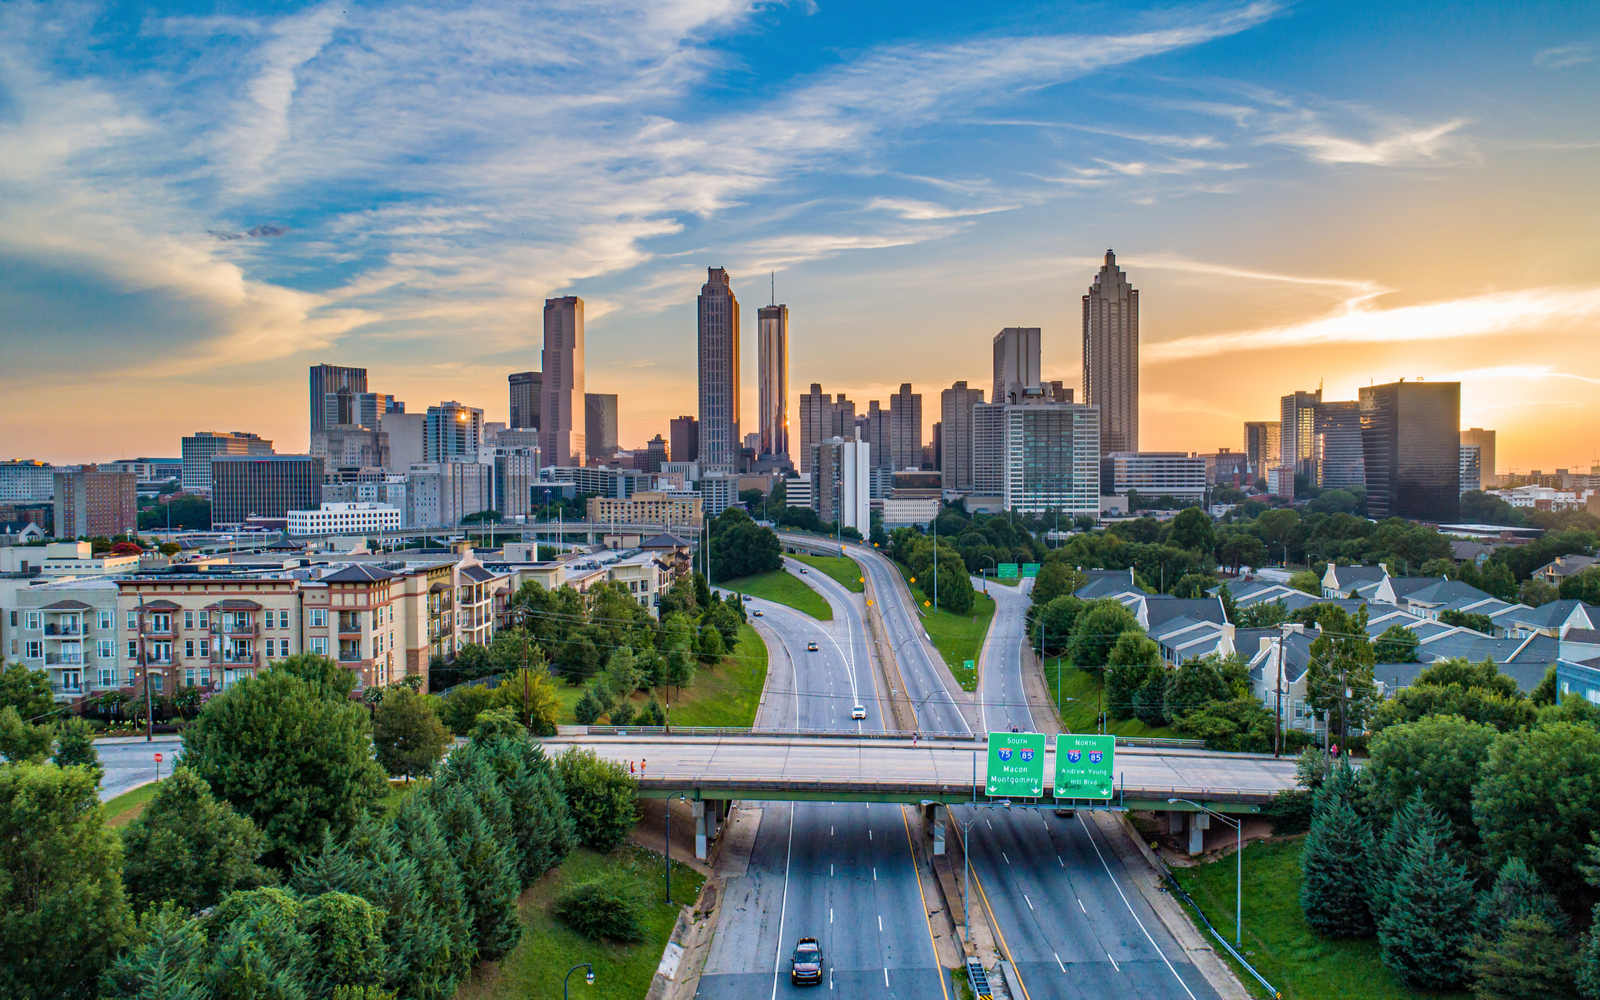 Photo for a piece titled Is Atlanta Safe with a highway running through the city